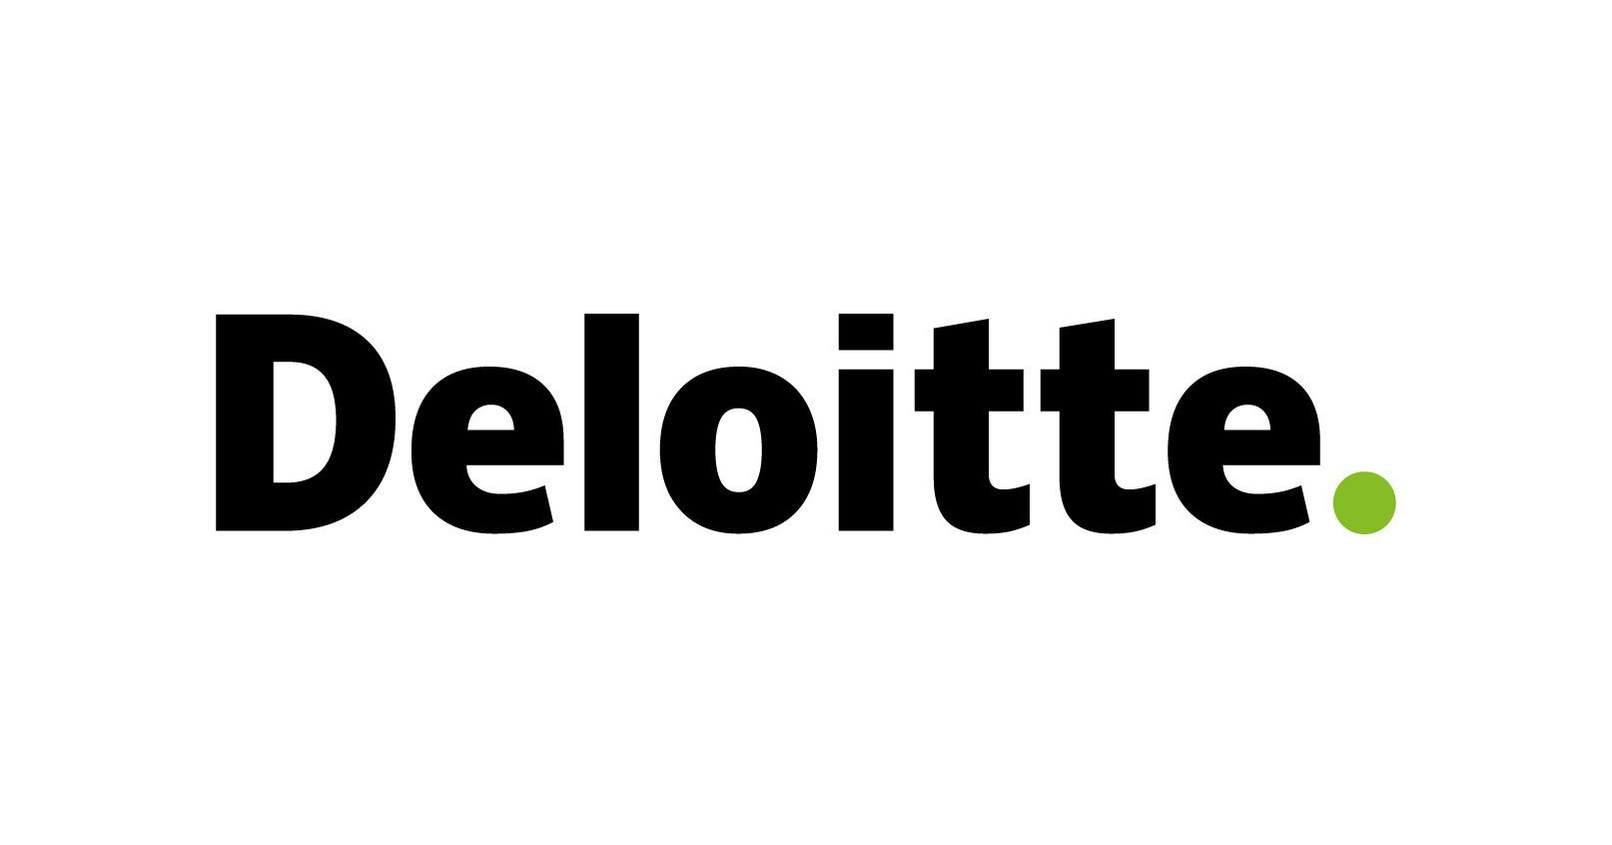 Deloitte Engineering: Unlocking the Strategic Potential of Software and Product Development for Enterprises